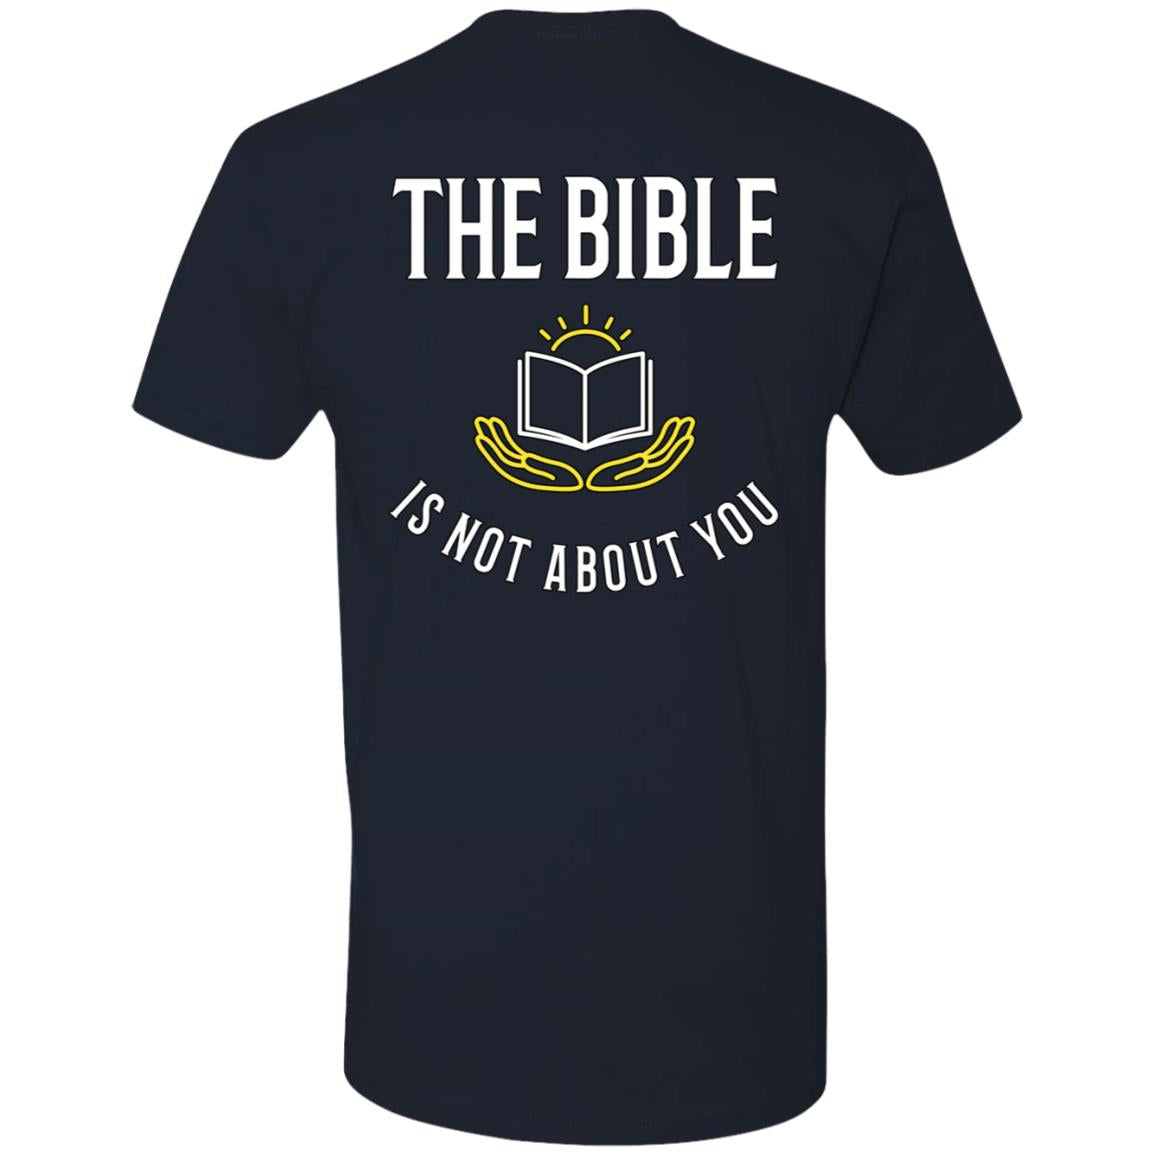 The Bible is not About You! (Unisex Tee)